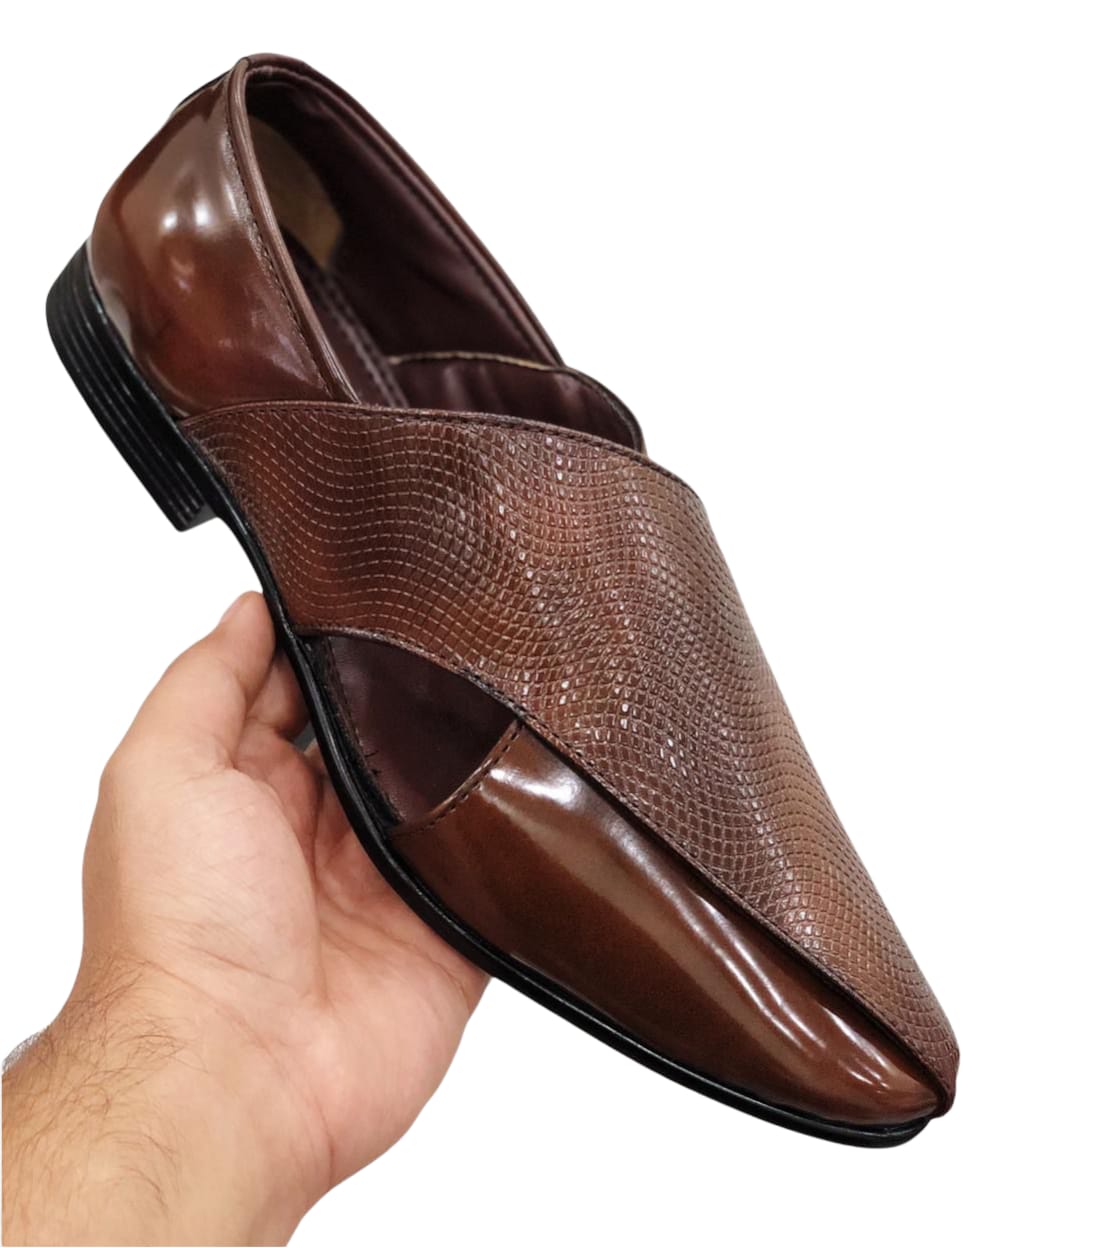 New Stylish Peshawari Sandal Loafer For Wedding and Casual Wear For Men-Jackmarc